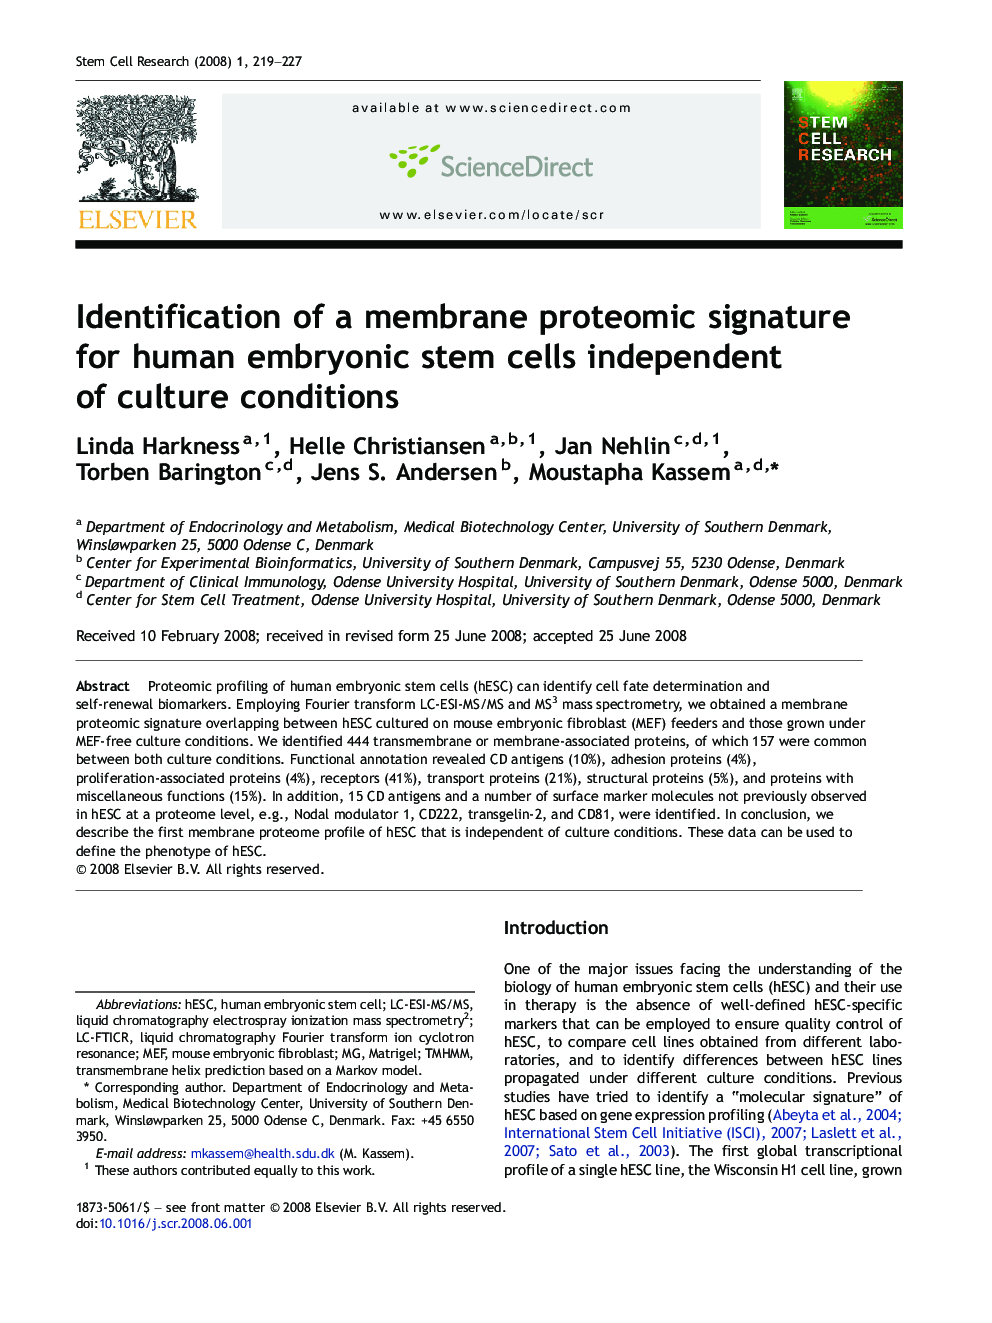 Identification of a membrane proteomic signature for human embryonic stem cells independent of culture conditions